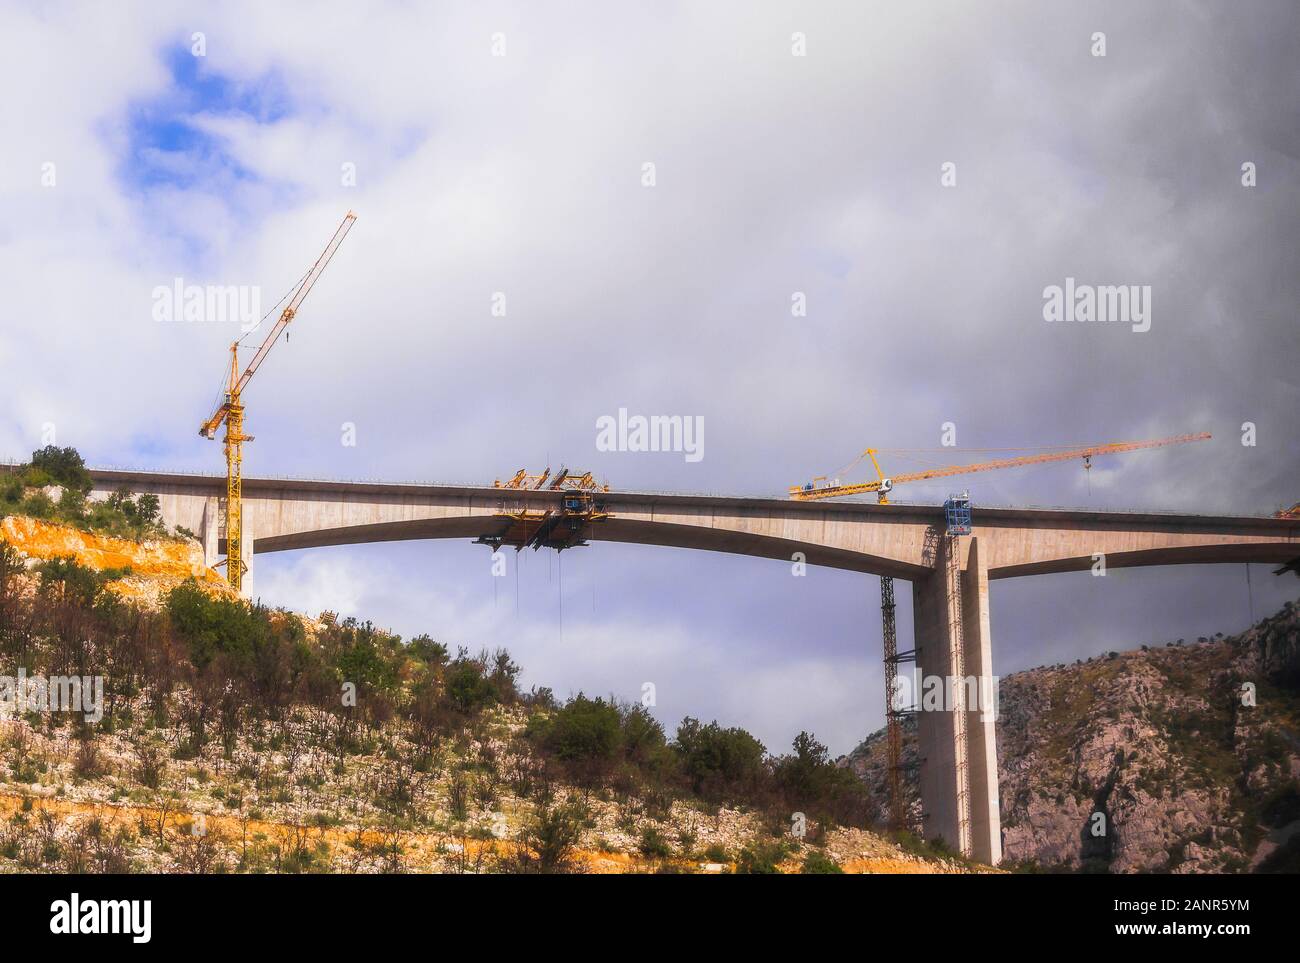 Constraction of new concrete bridge for new highway Bar - Bolijare over canyon of Tara river in MONTENEGRO, Europe Stock Photo